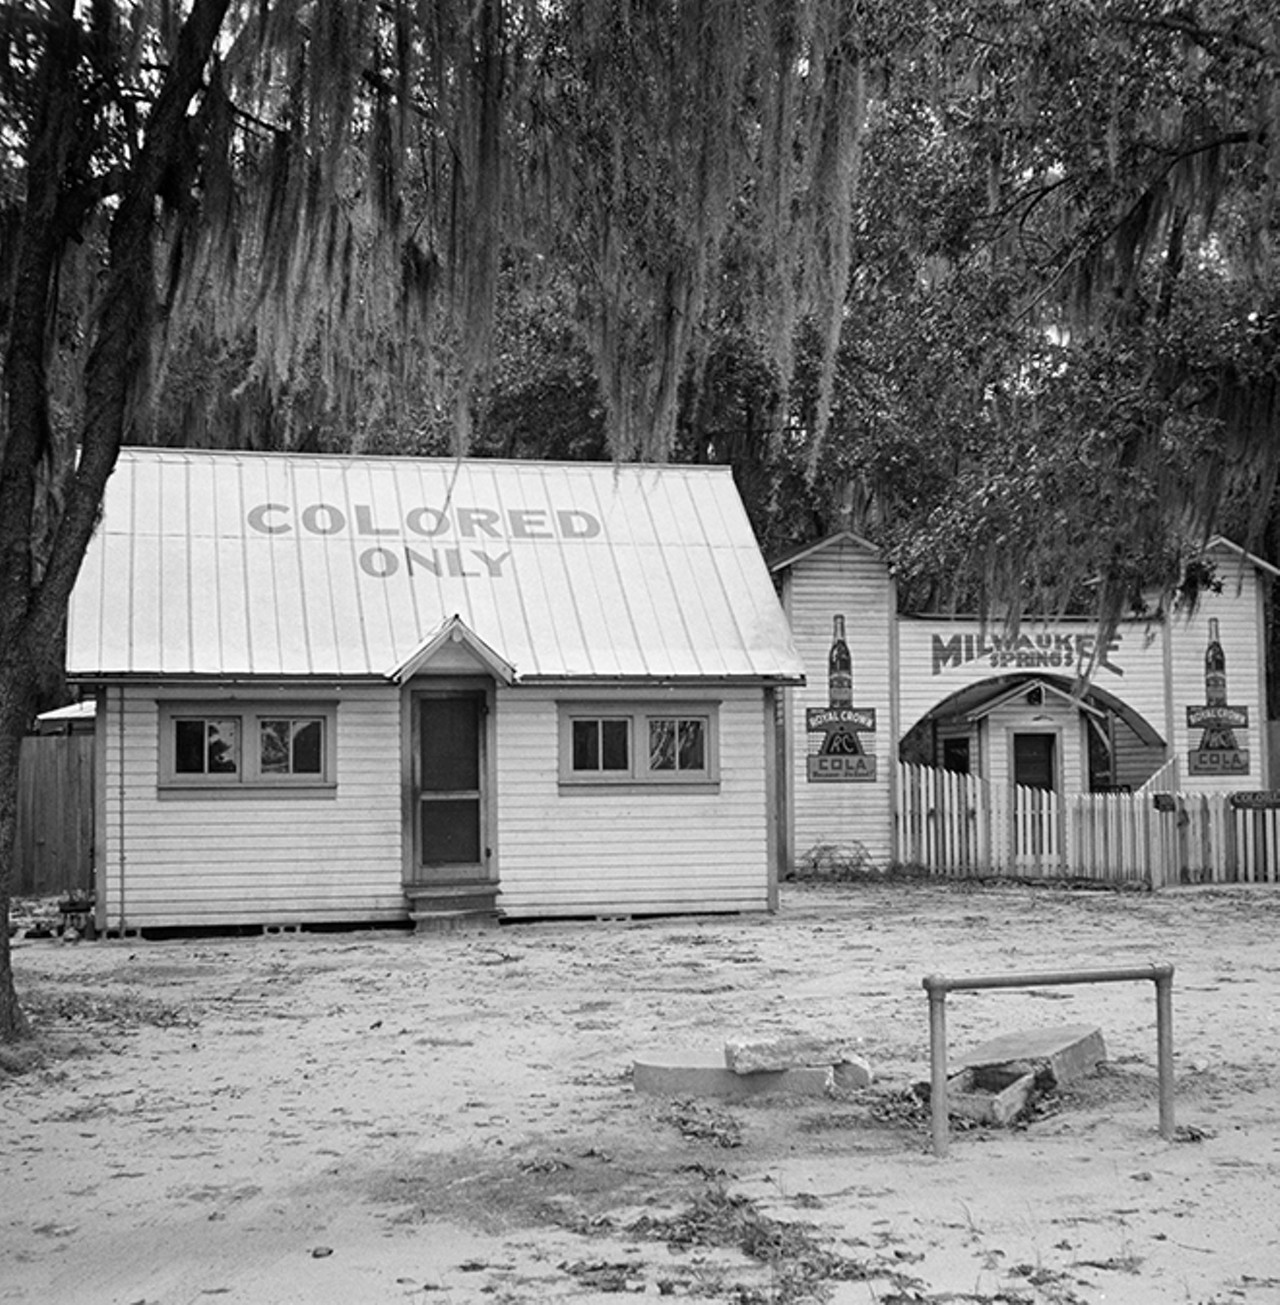 Milwaukee Springs was a recreation area in Alachua County near Gainesville, originally created as a camp for African American boys. There is evidence it might have been used as a recreation area for African American soldiers in the 1940s. Photo by Charles Foster. By permission of the State Archives of Florida. Reprinted with permission of the University Press of Florida.